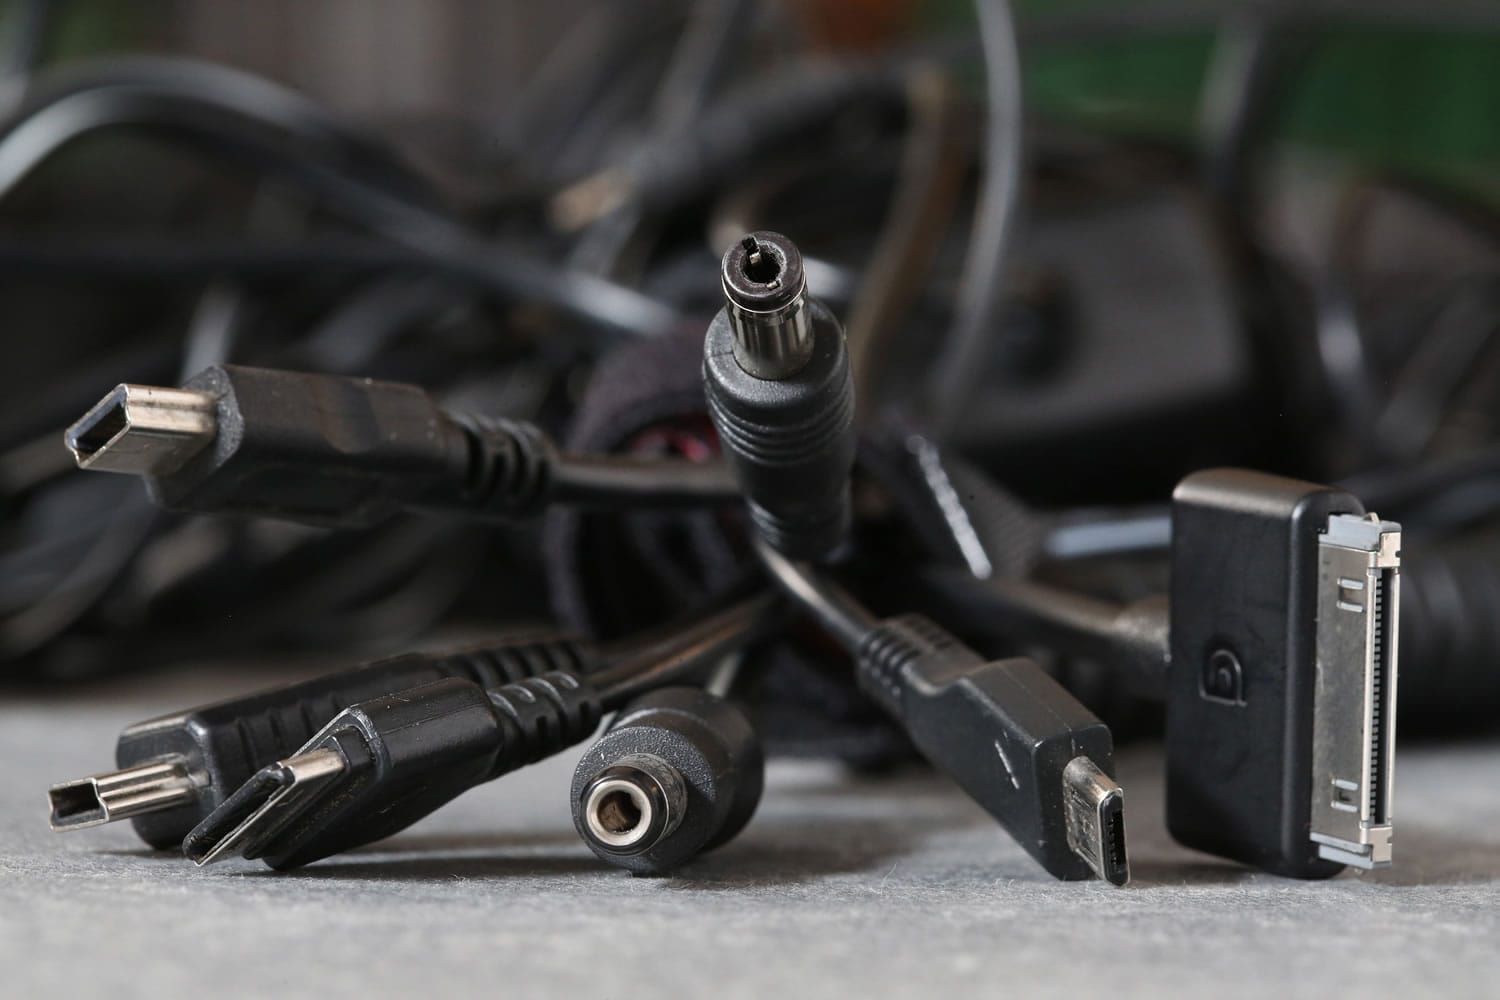 A variety of digital connecting cords are displayed among a tangle of donated devices and connectors at Northwestern University in Evanston, Ill.